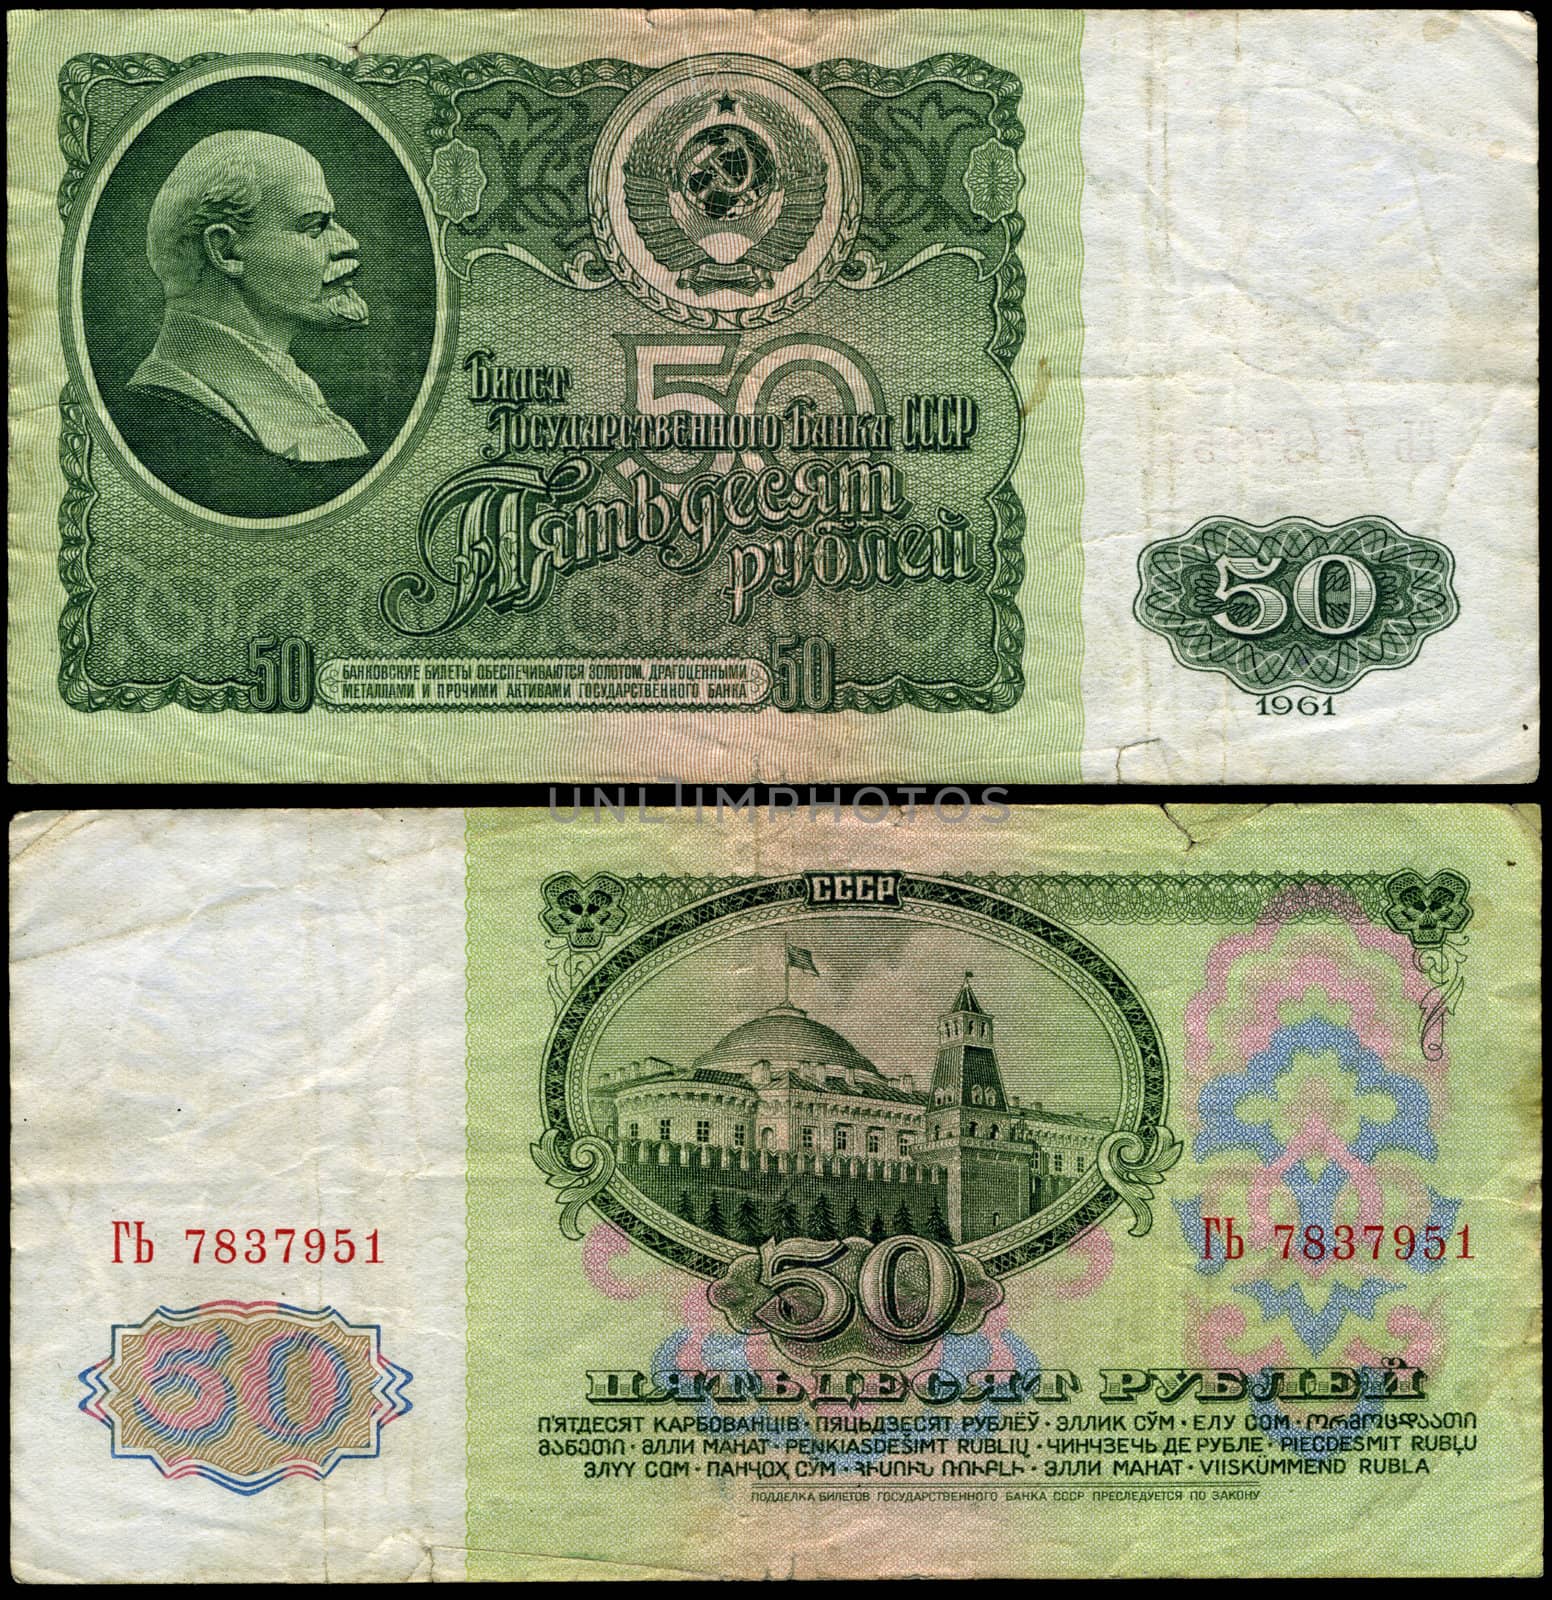 50 Roubles USSR 1961  by Nemo1024